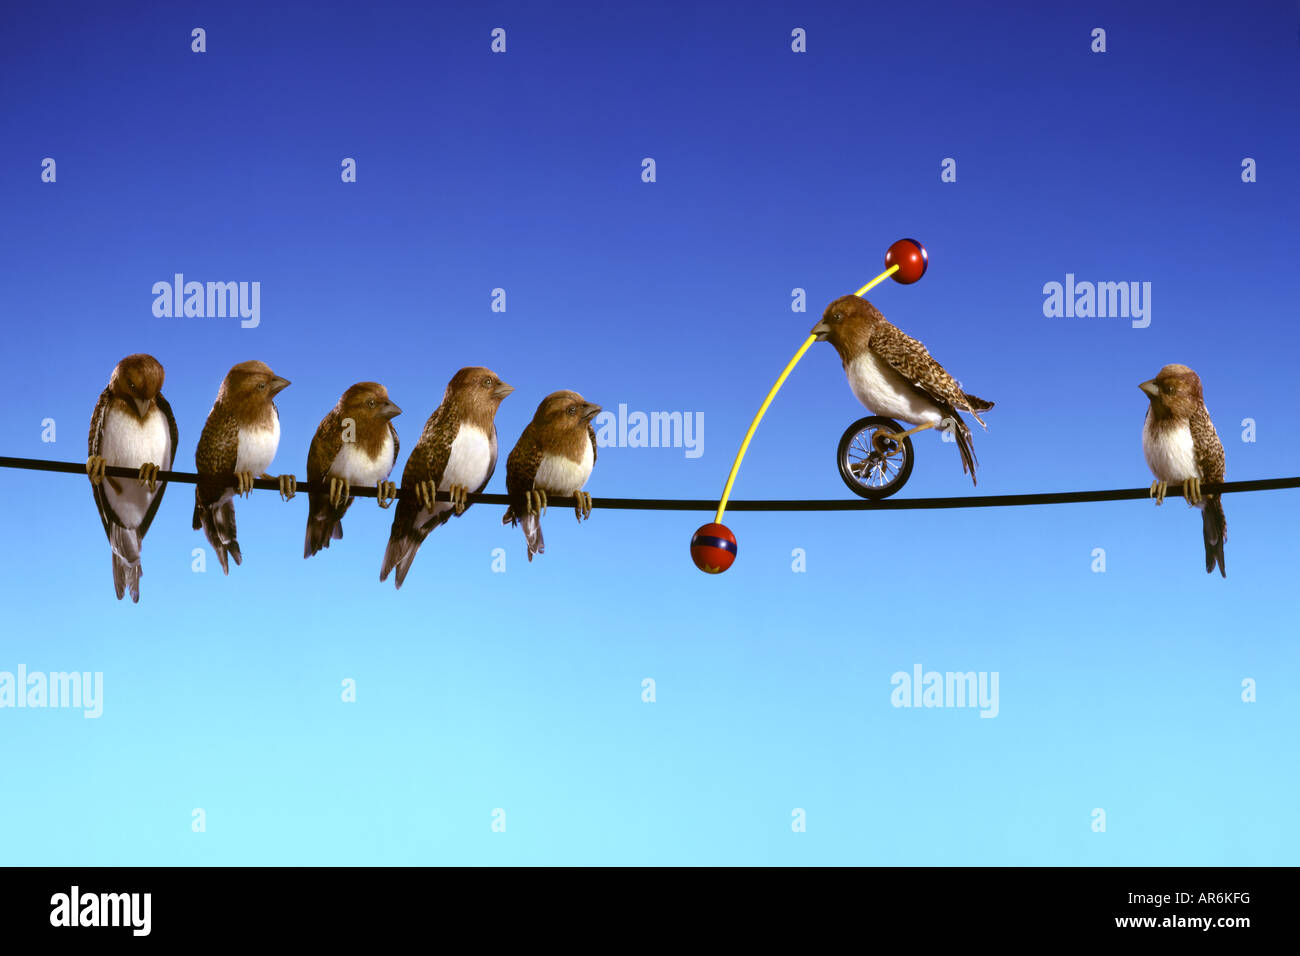 Character Birds on a high wire with one clever one showing off ! Stock Photo